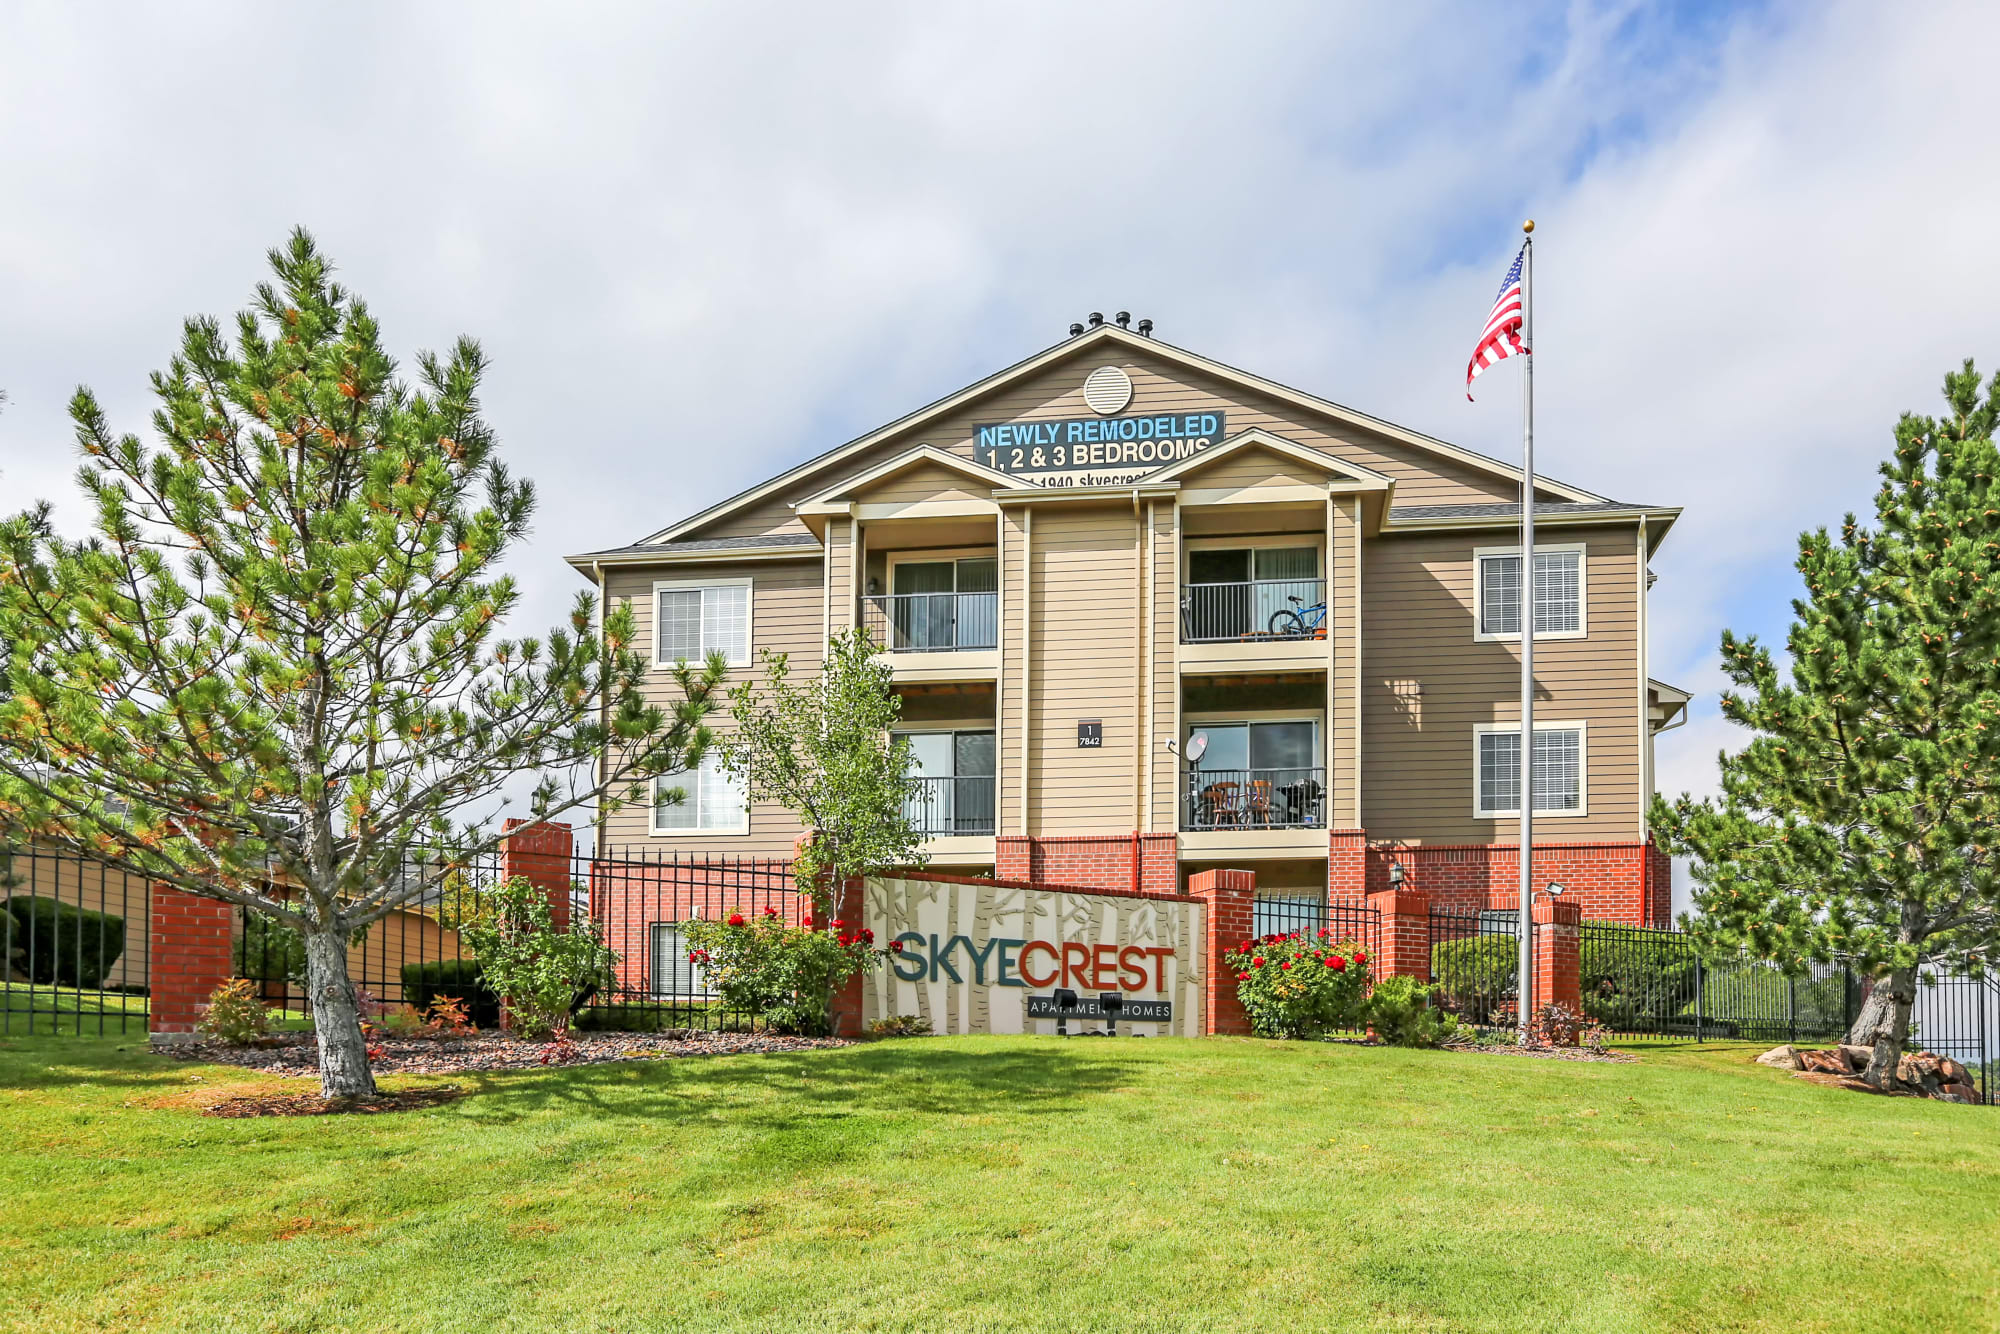 The exterior of Skyecrest Apartments in Lakewood, Colorado